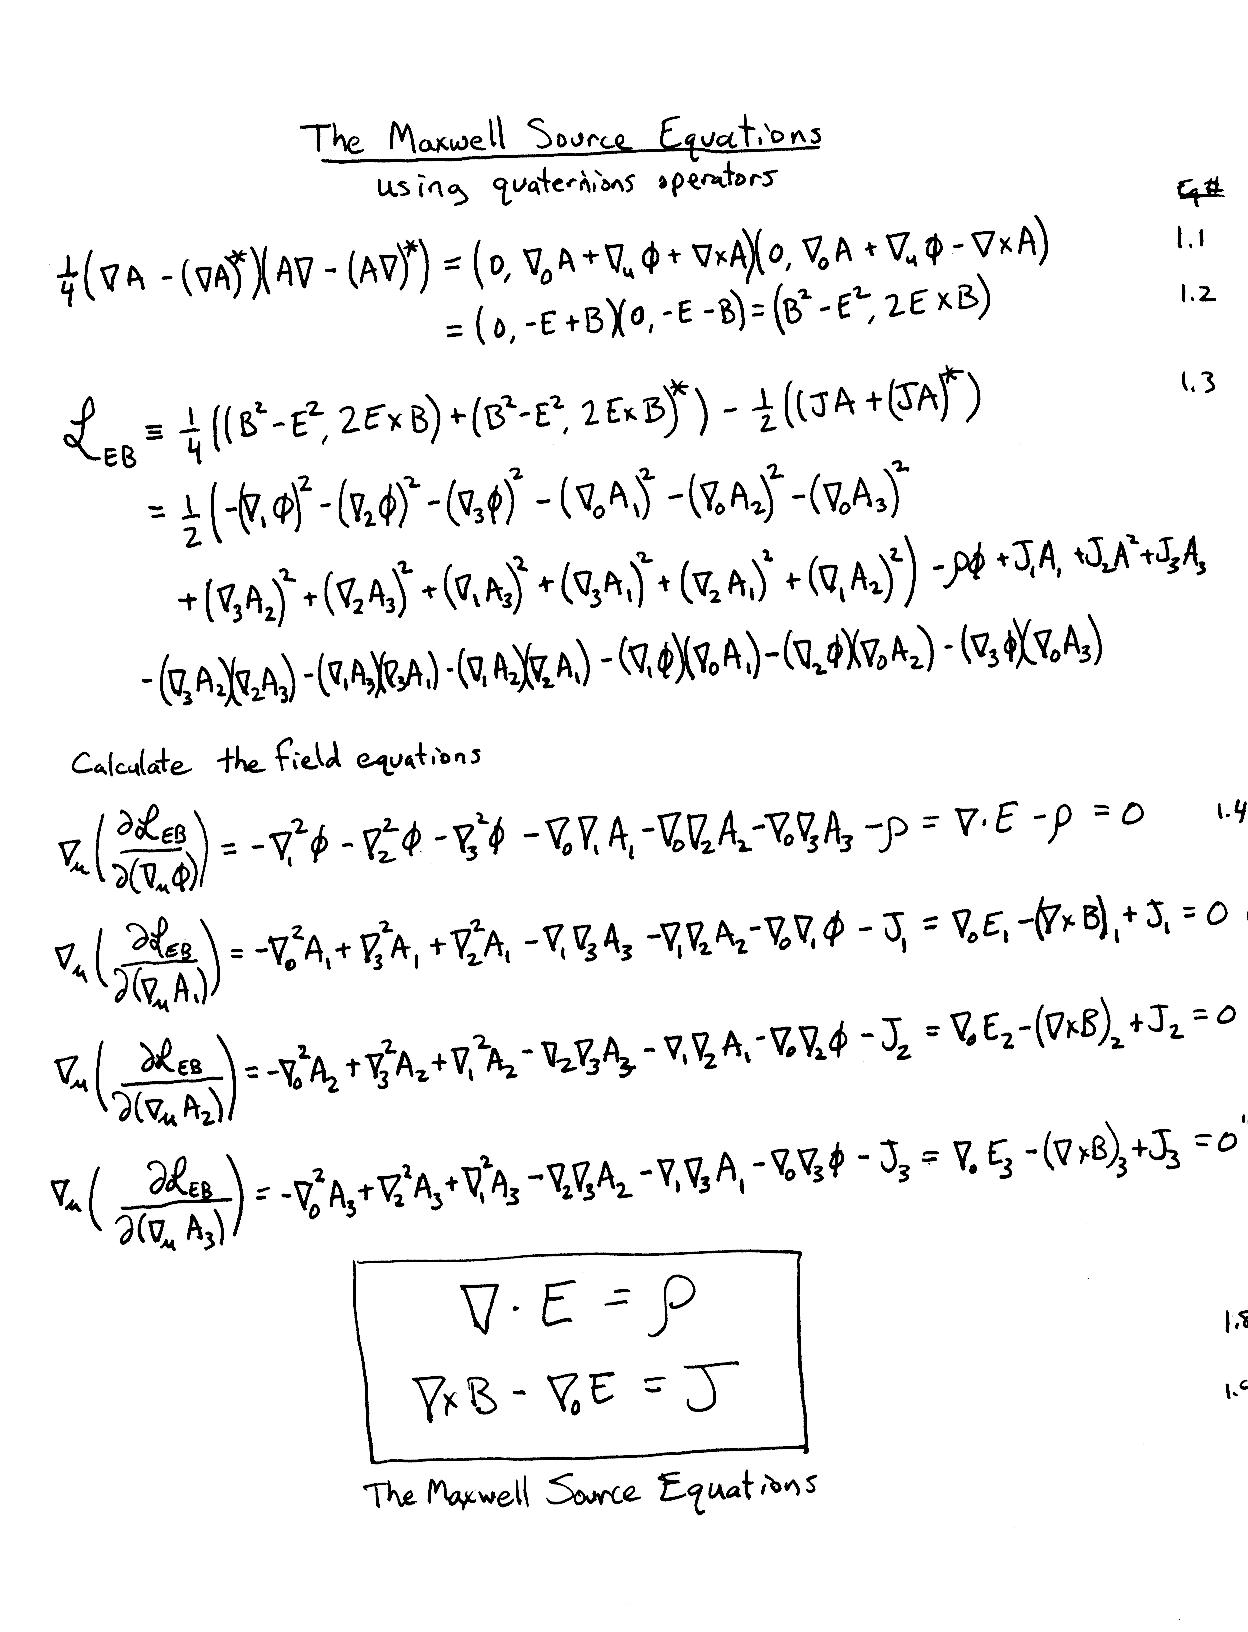 The Maxwell source equations derivation by hand